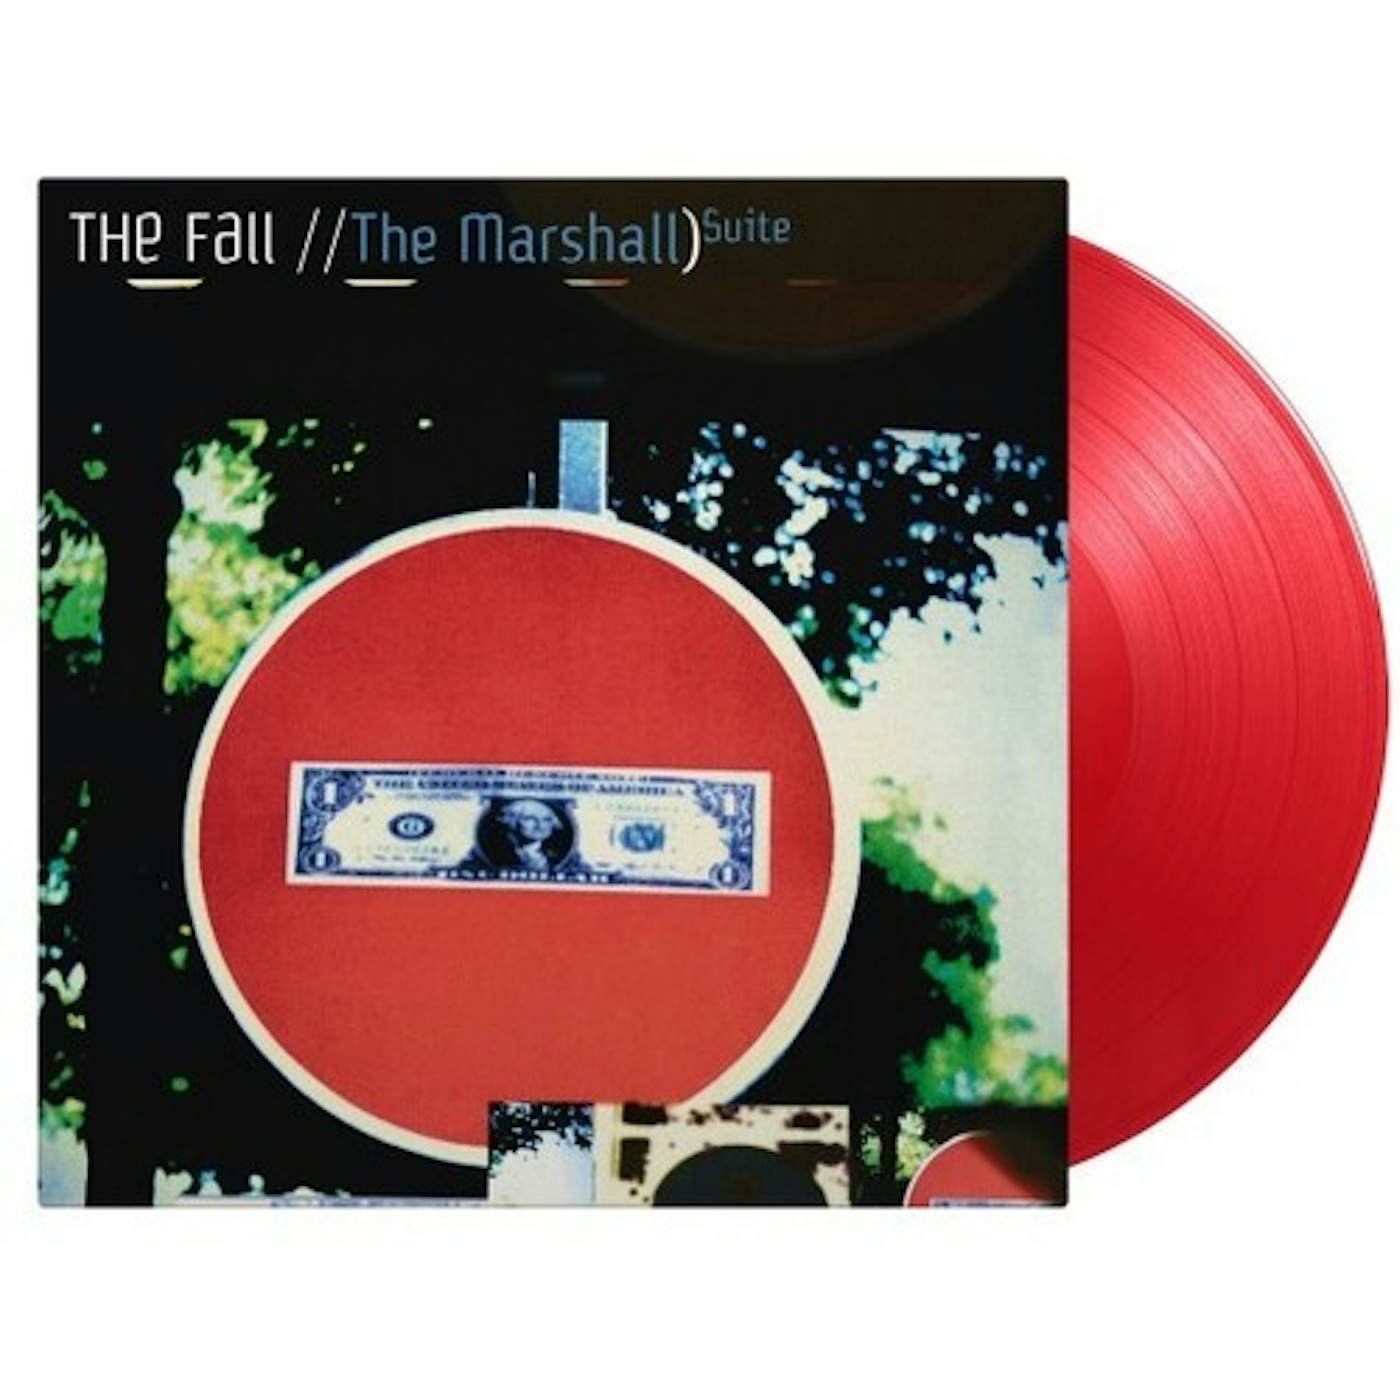 The Fall MARSHALL SUITE Vinyl Record